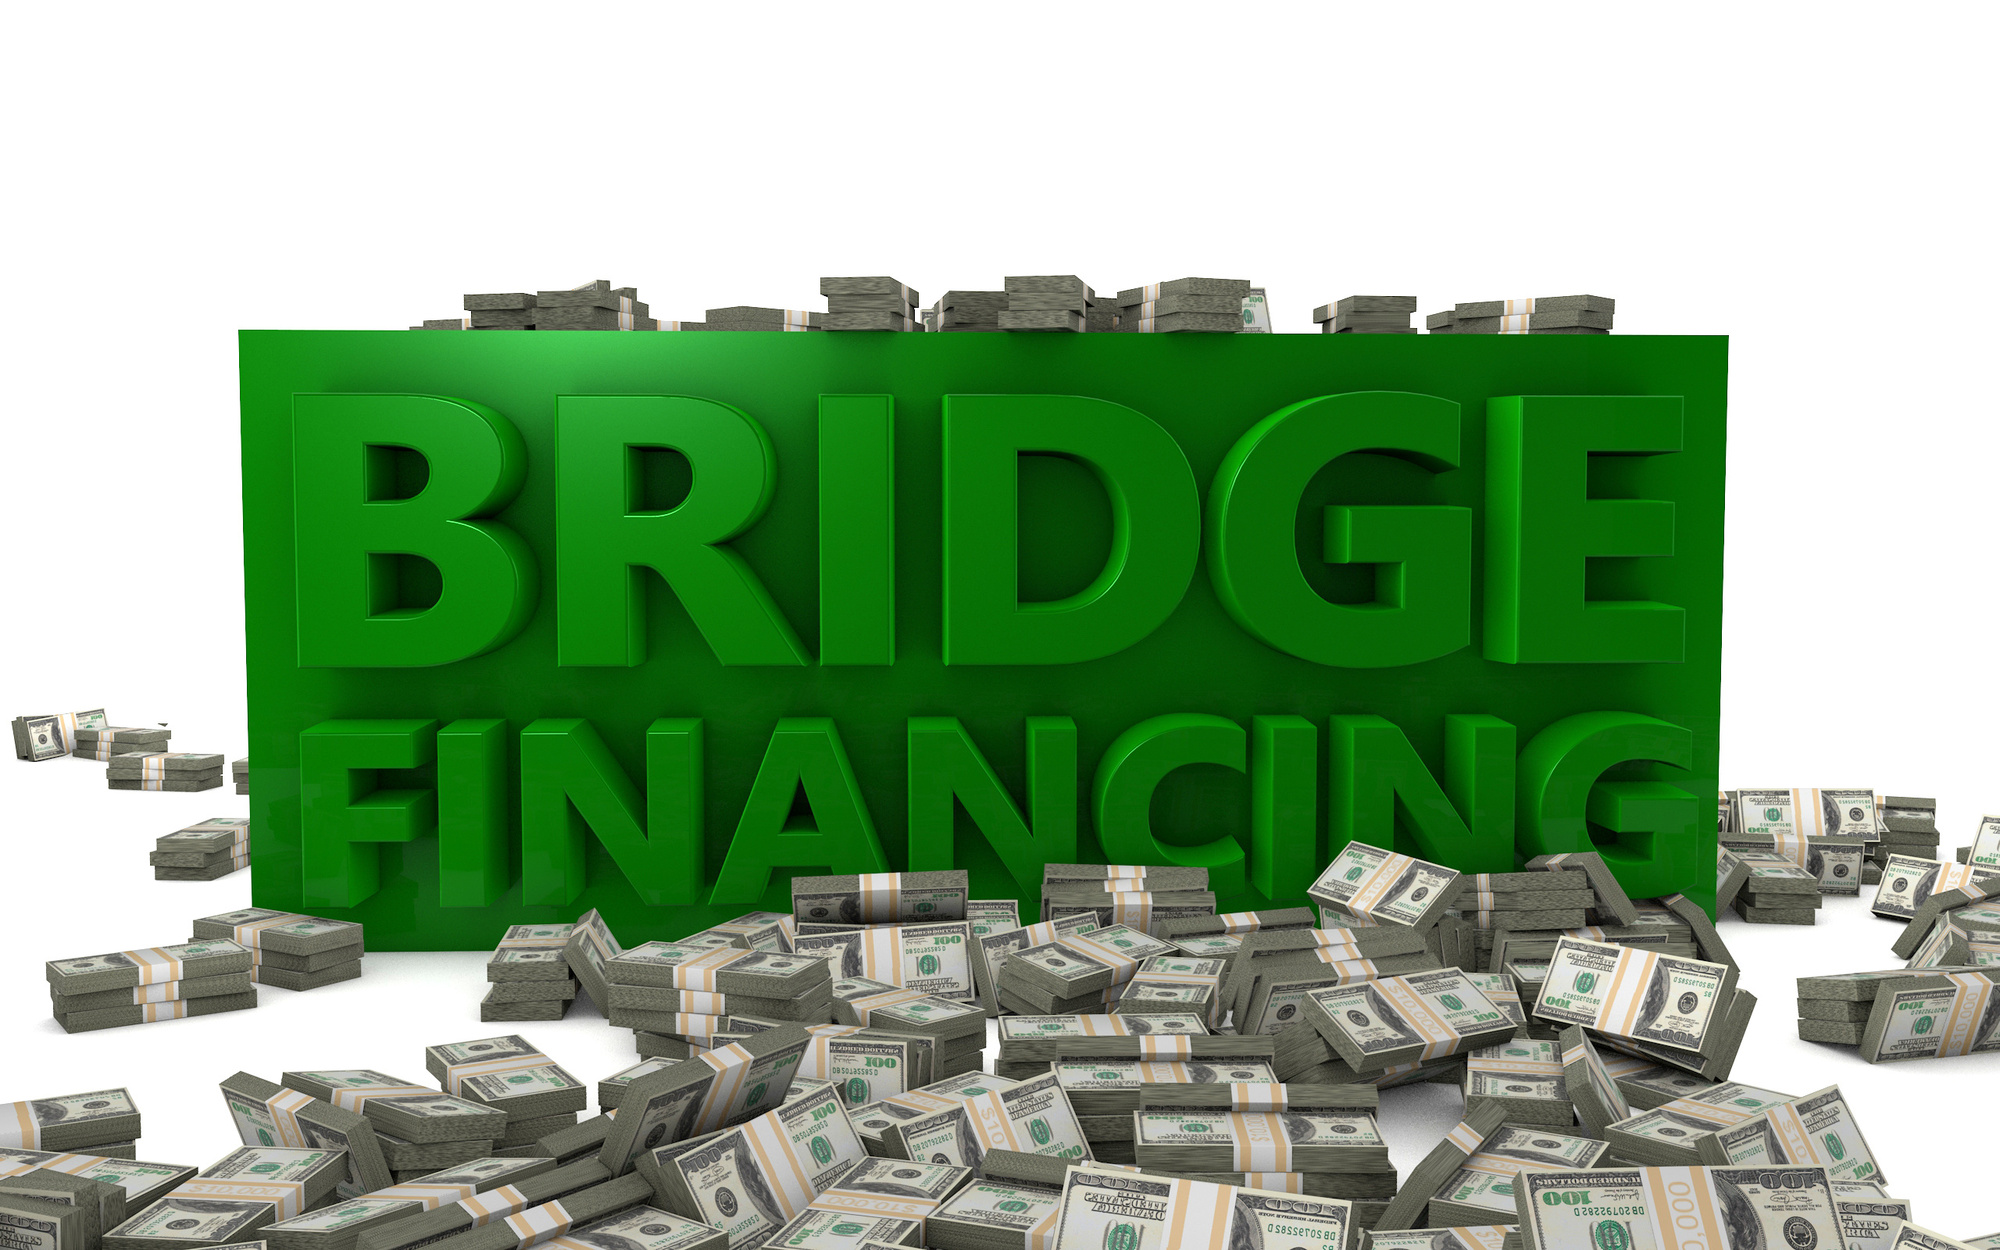 pros and cons of bridge loans